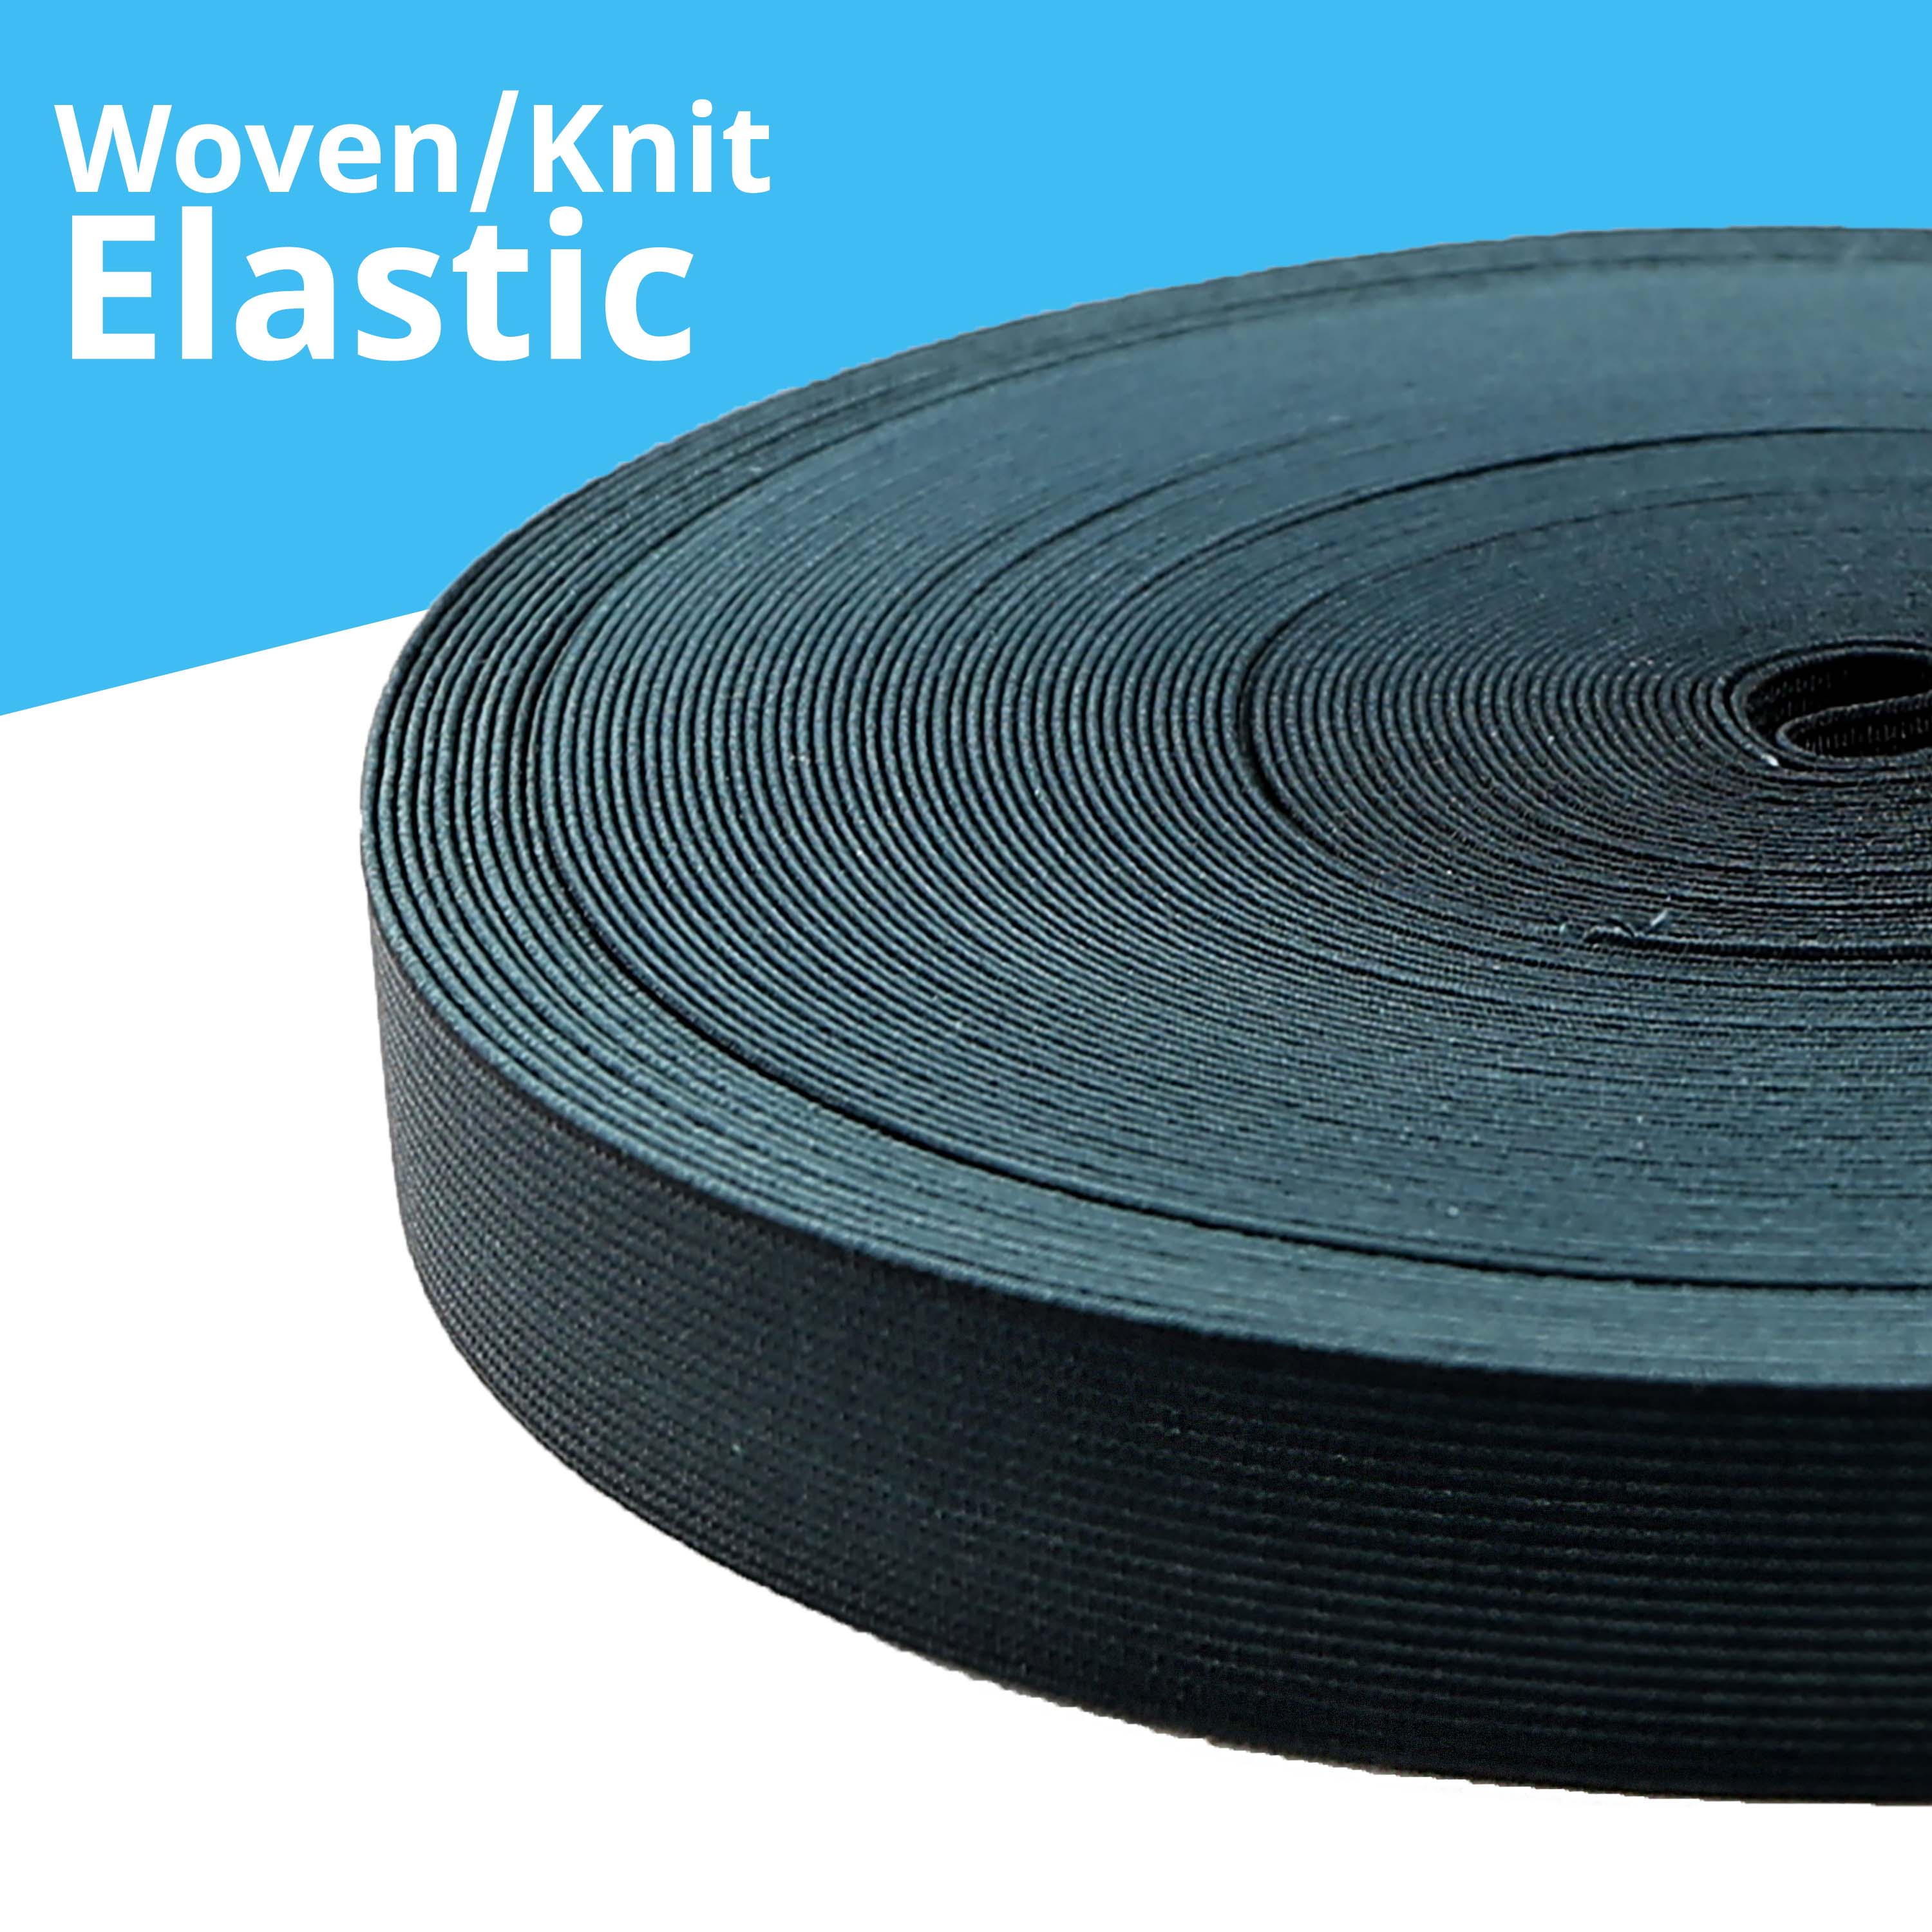 Woven and Knitted Elastic